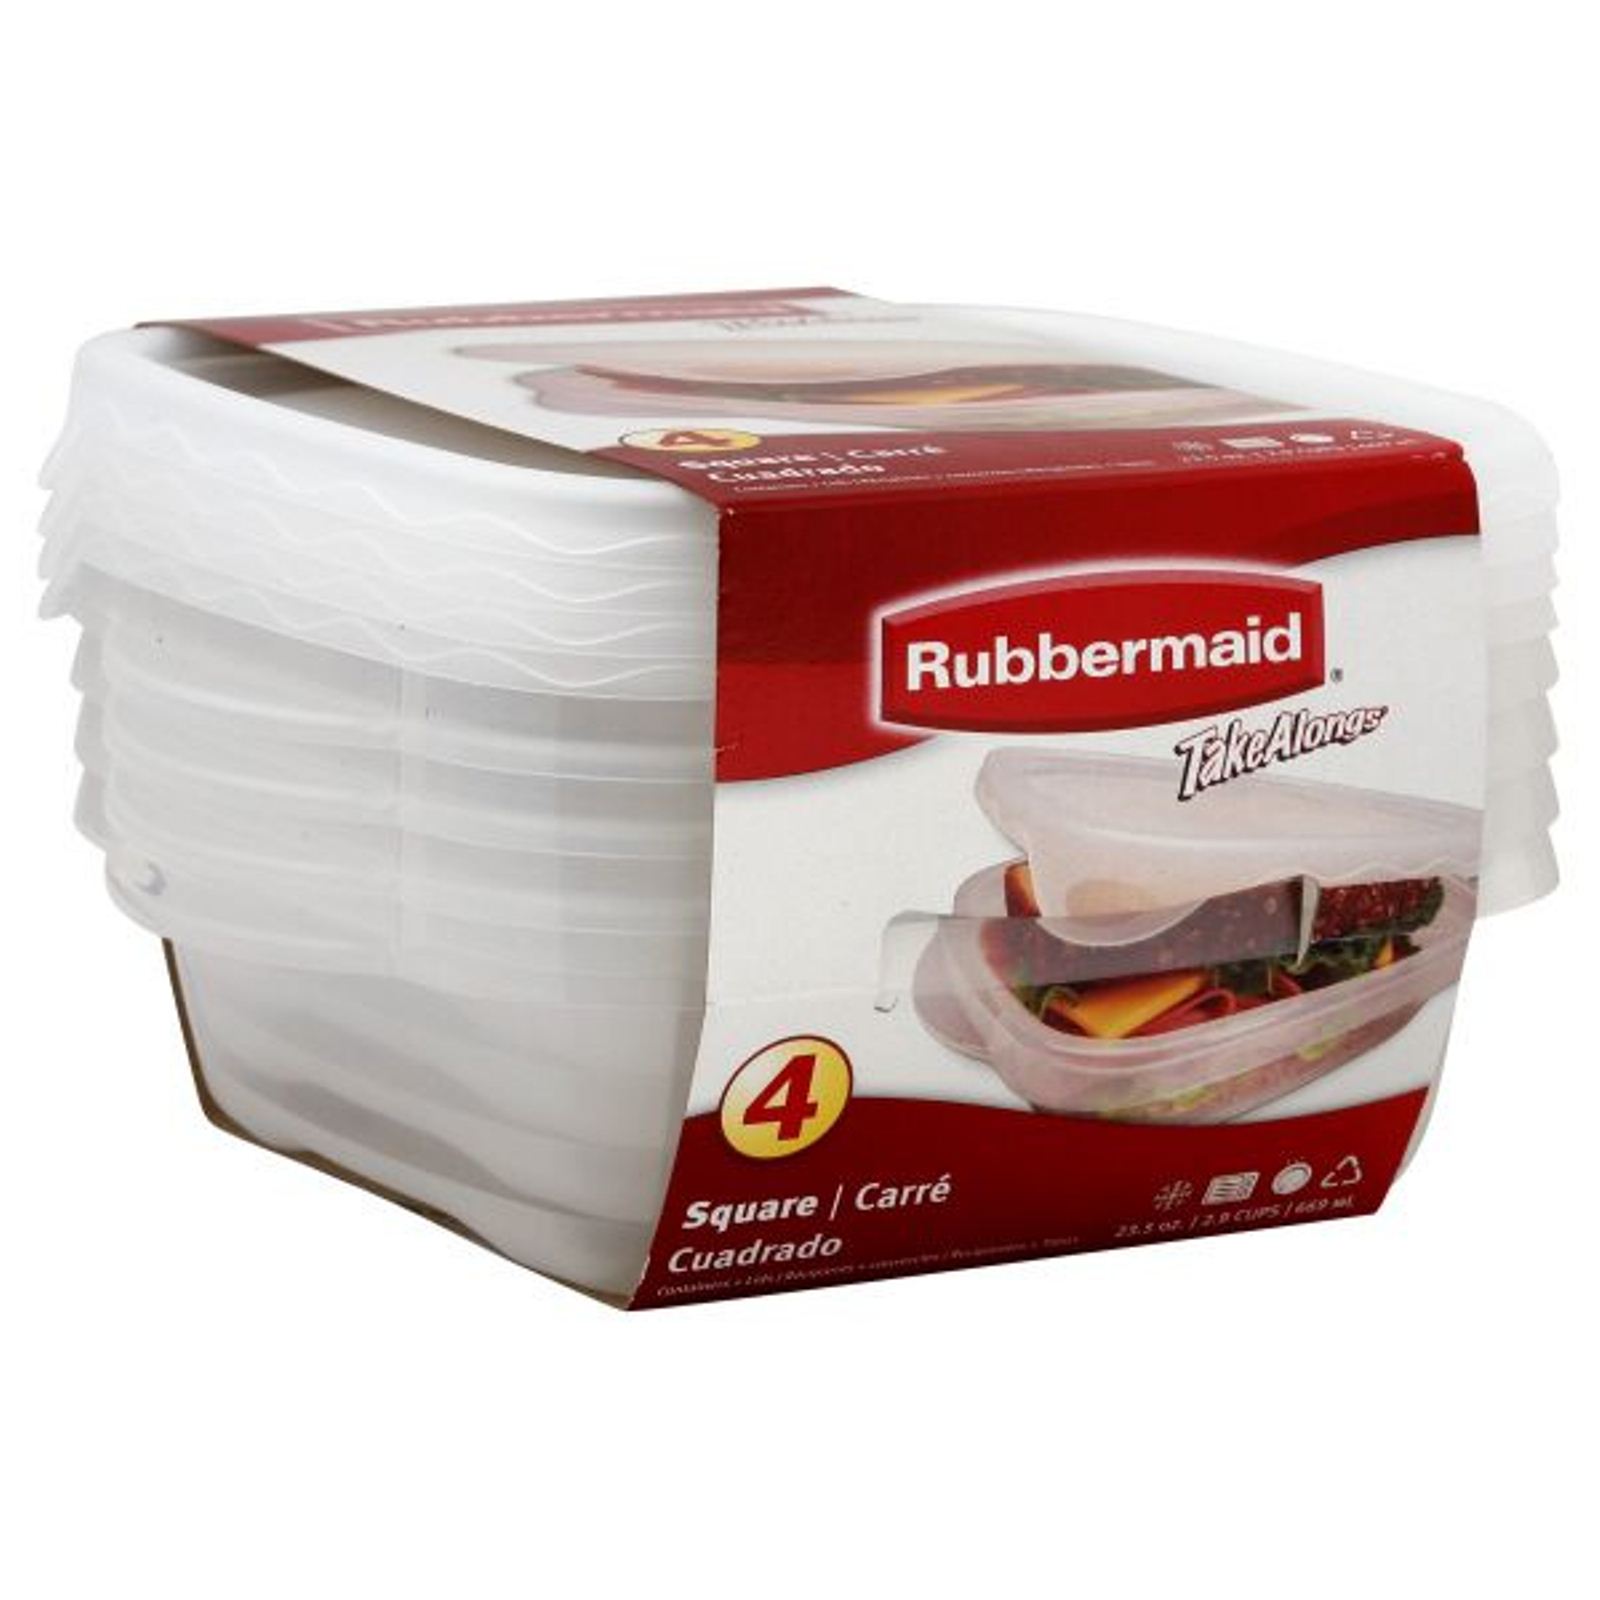 Rubbermaid TakeAlongs 4-Pack Square Food Containers